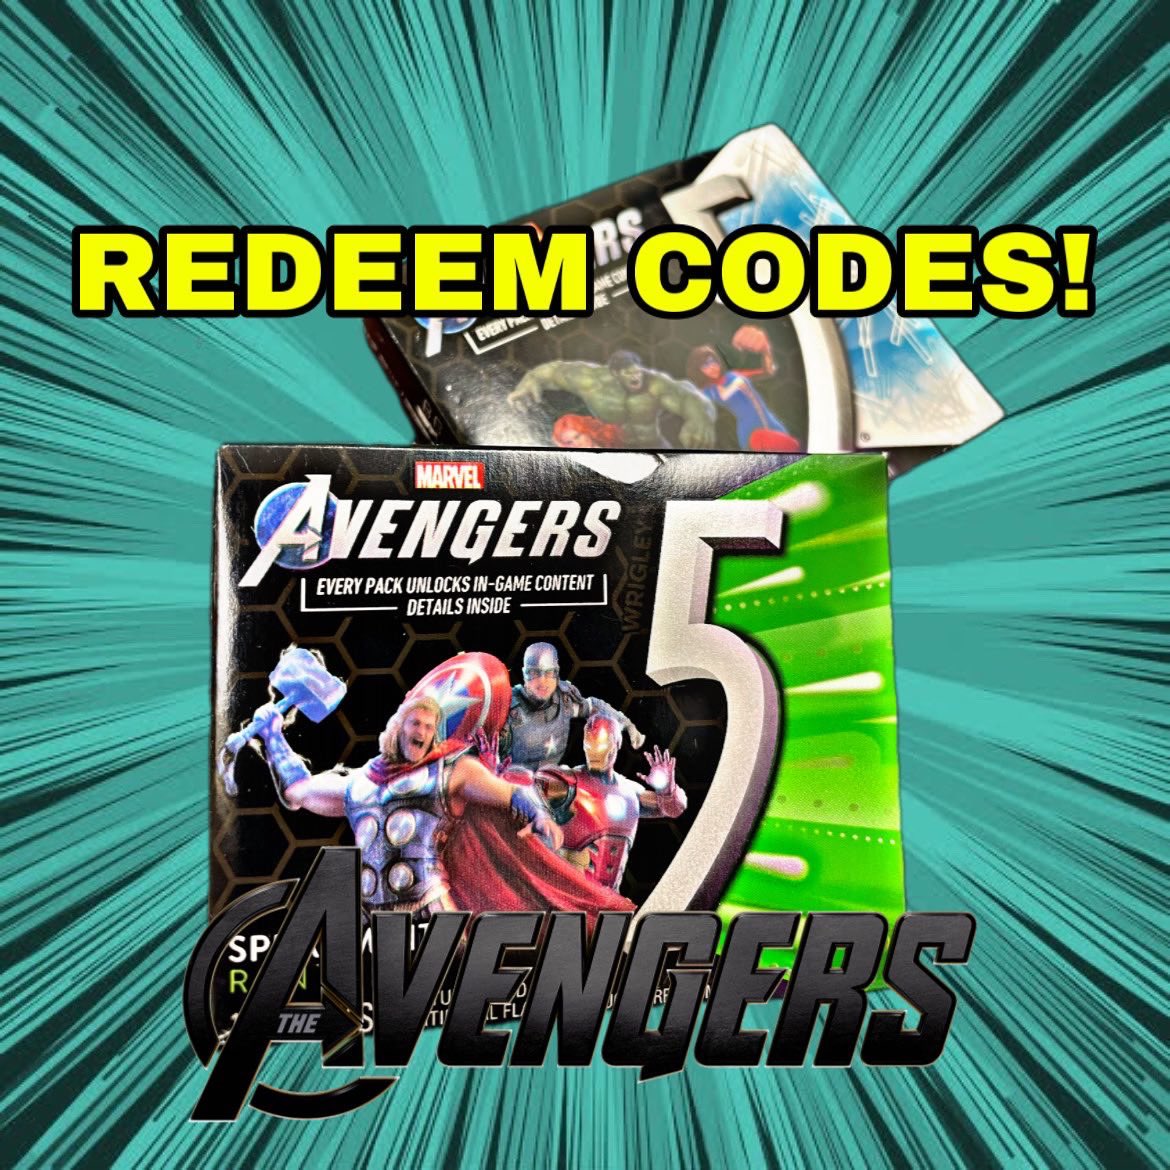 NEW TO @PlayAvengers ? The codes from @5gum came out on release and are still redeemable if you can find them. There are 16 codes so get 16packs! #playavengers #MarvelsAvengers #avengersgame #5gum #redeemcode #gaming https://t.co/awkv0OfwhP.